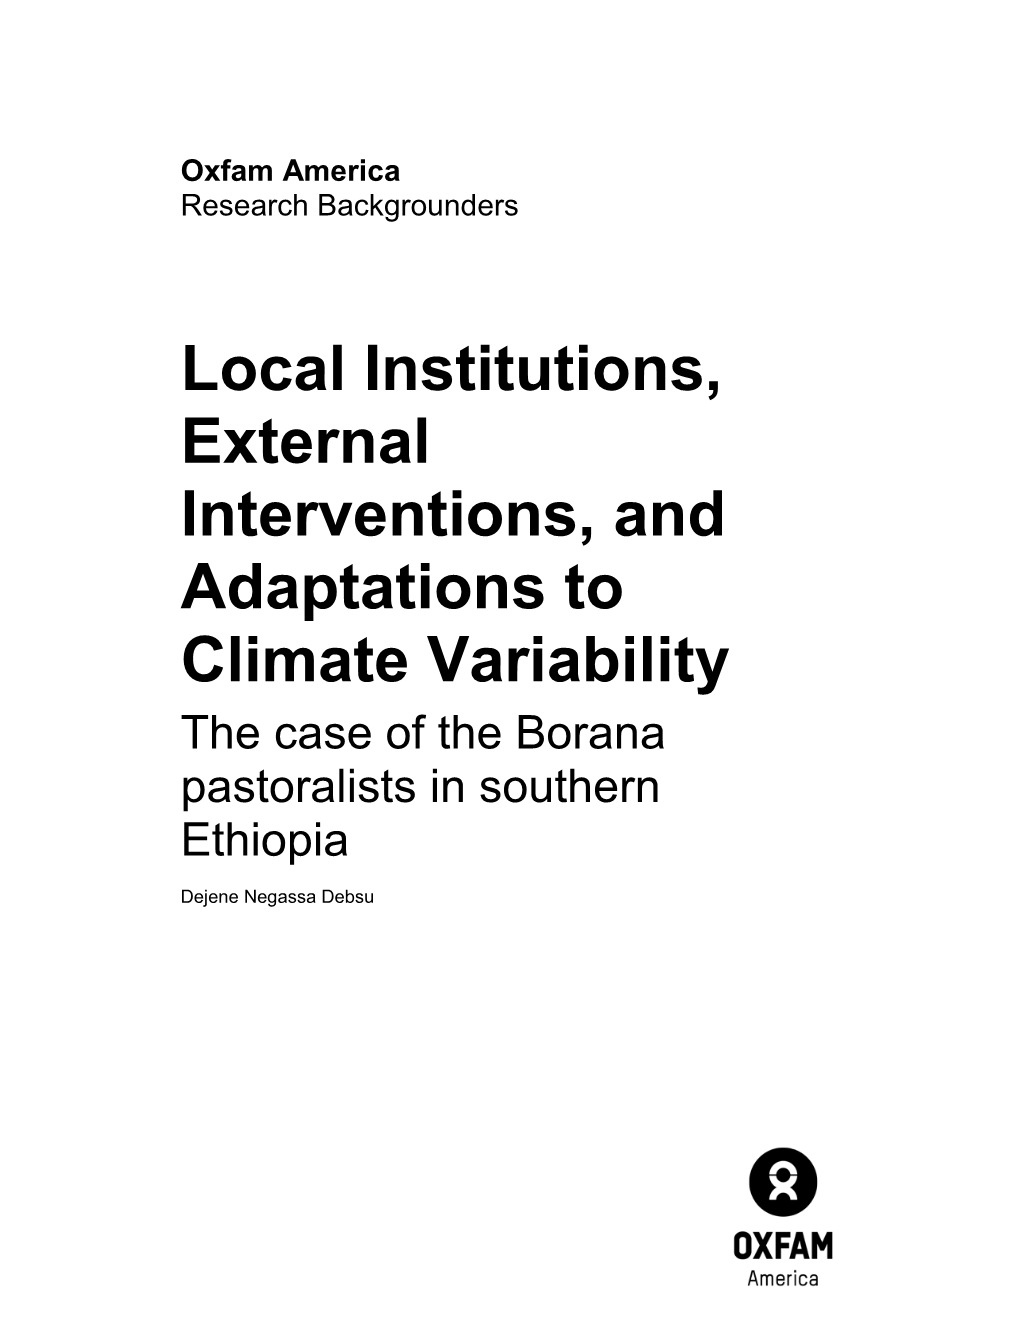 Local Institutions, External Interventions, and Adaptations to Climate Variability the Case of the Borana Pastoralists in Southern Ethiopia